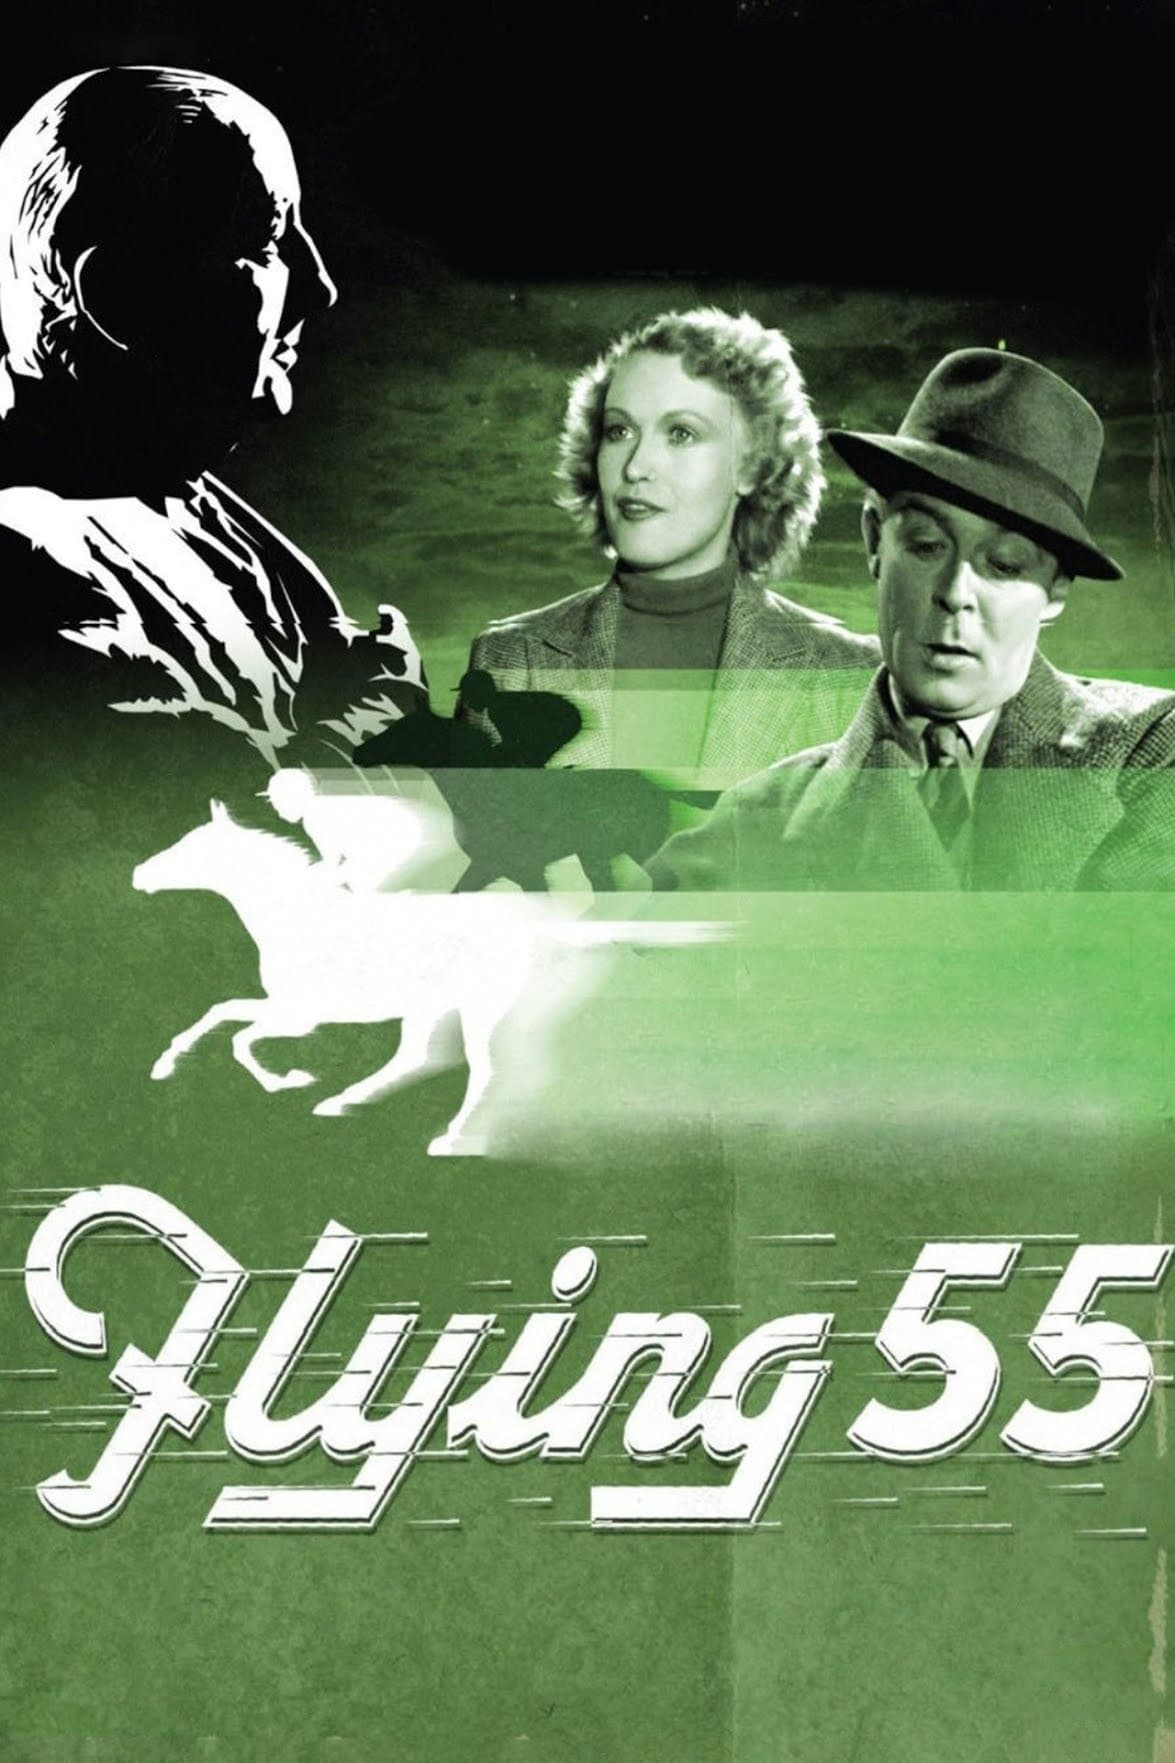 Flying Fifty-Five